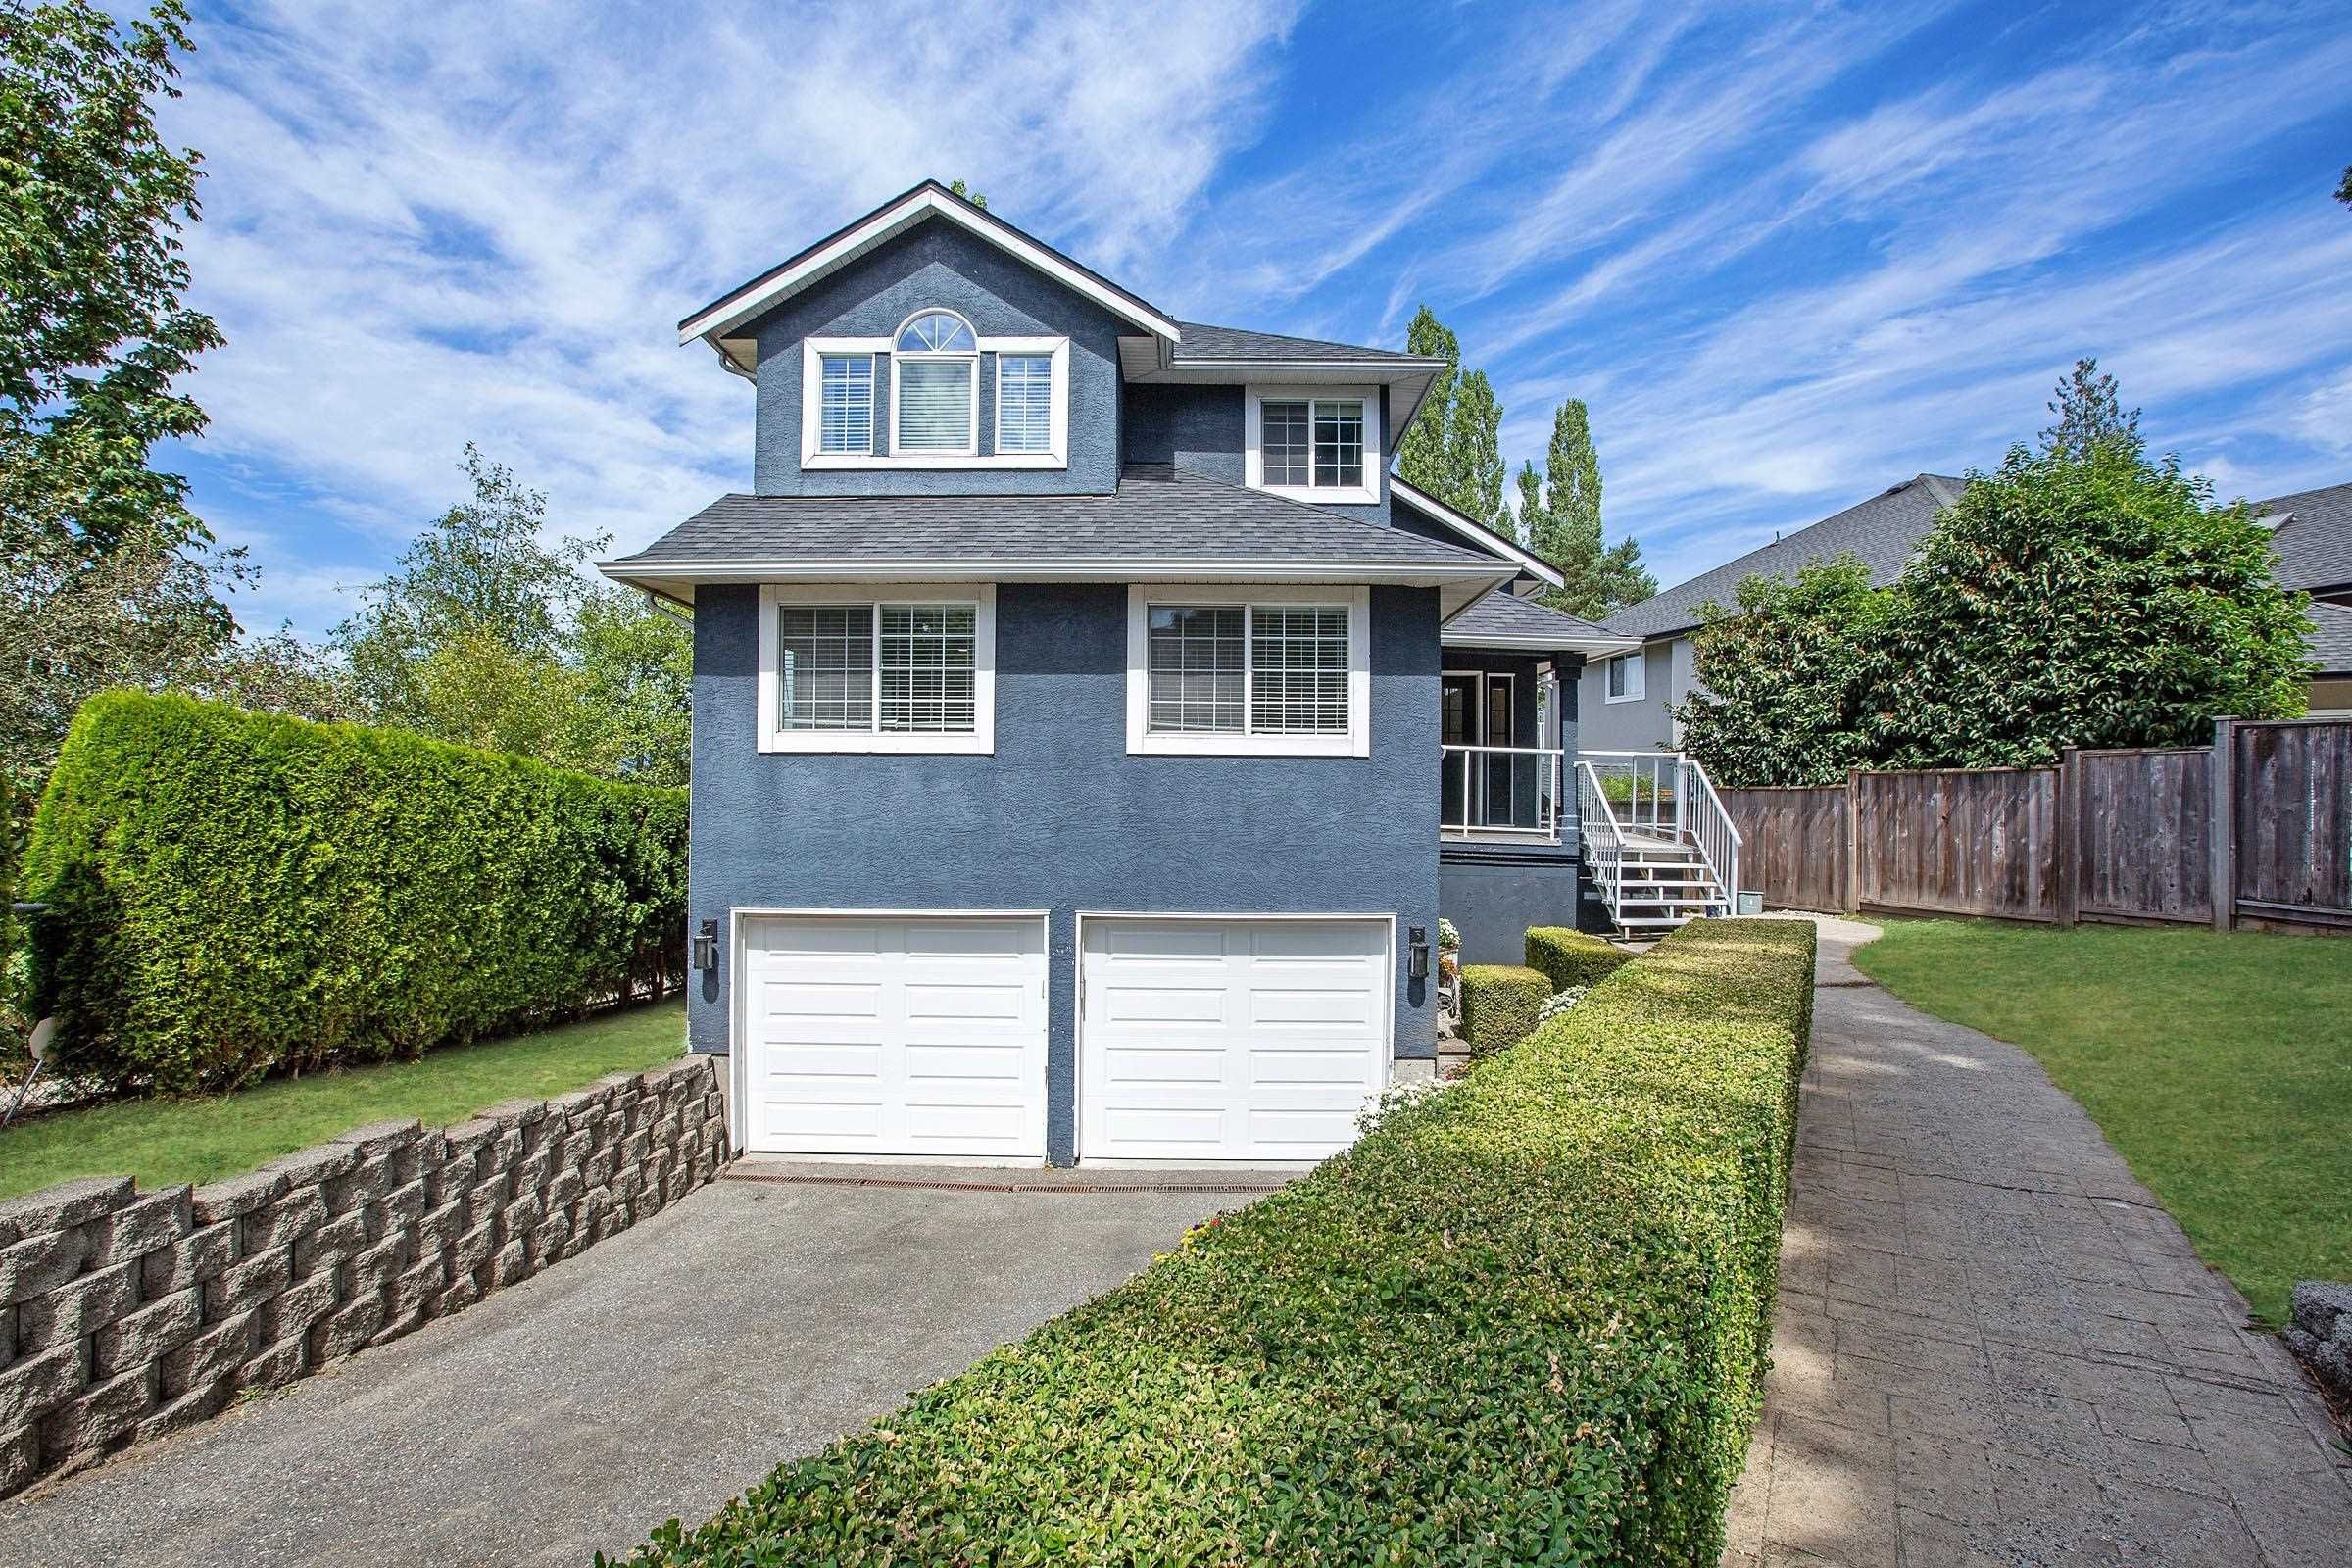 Main Photo: 20531 98 AVENUE in : Walnut Grove House for sale (Langley)  : MLS®# R2610200